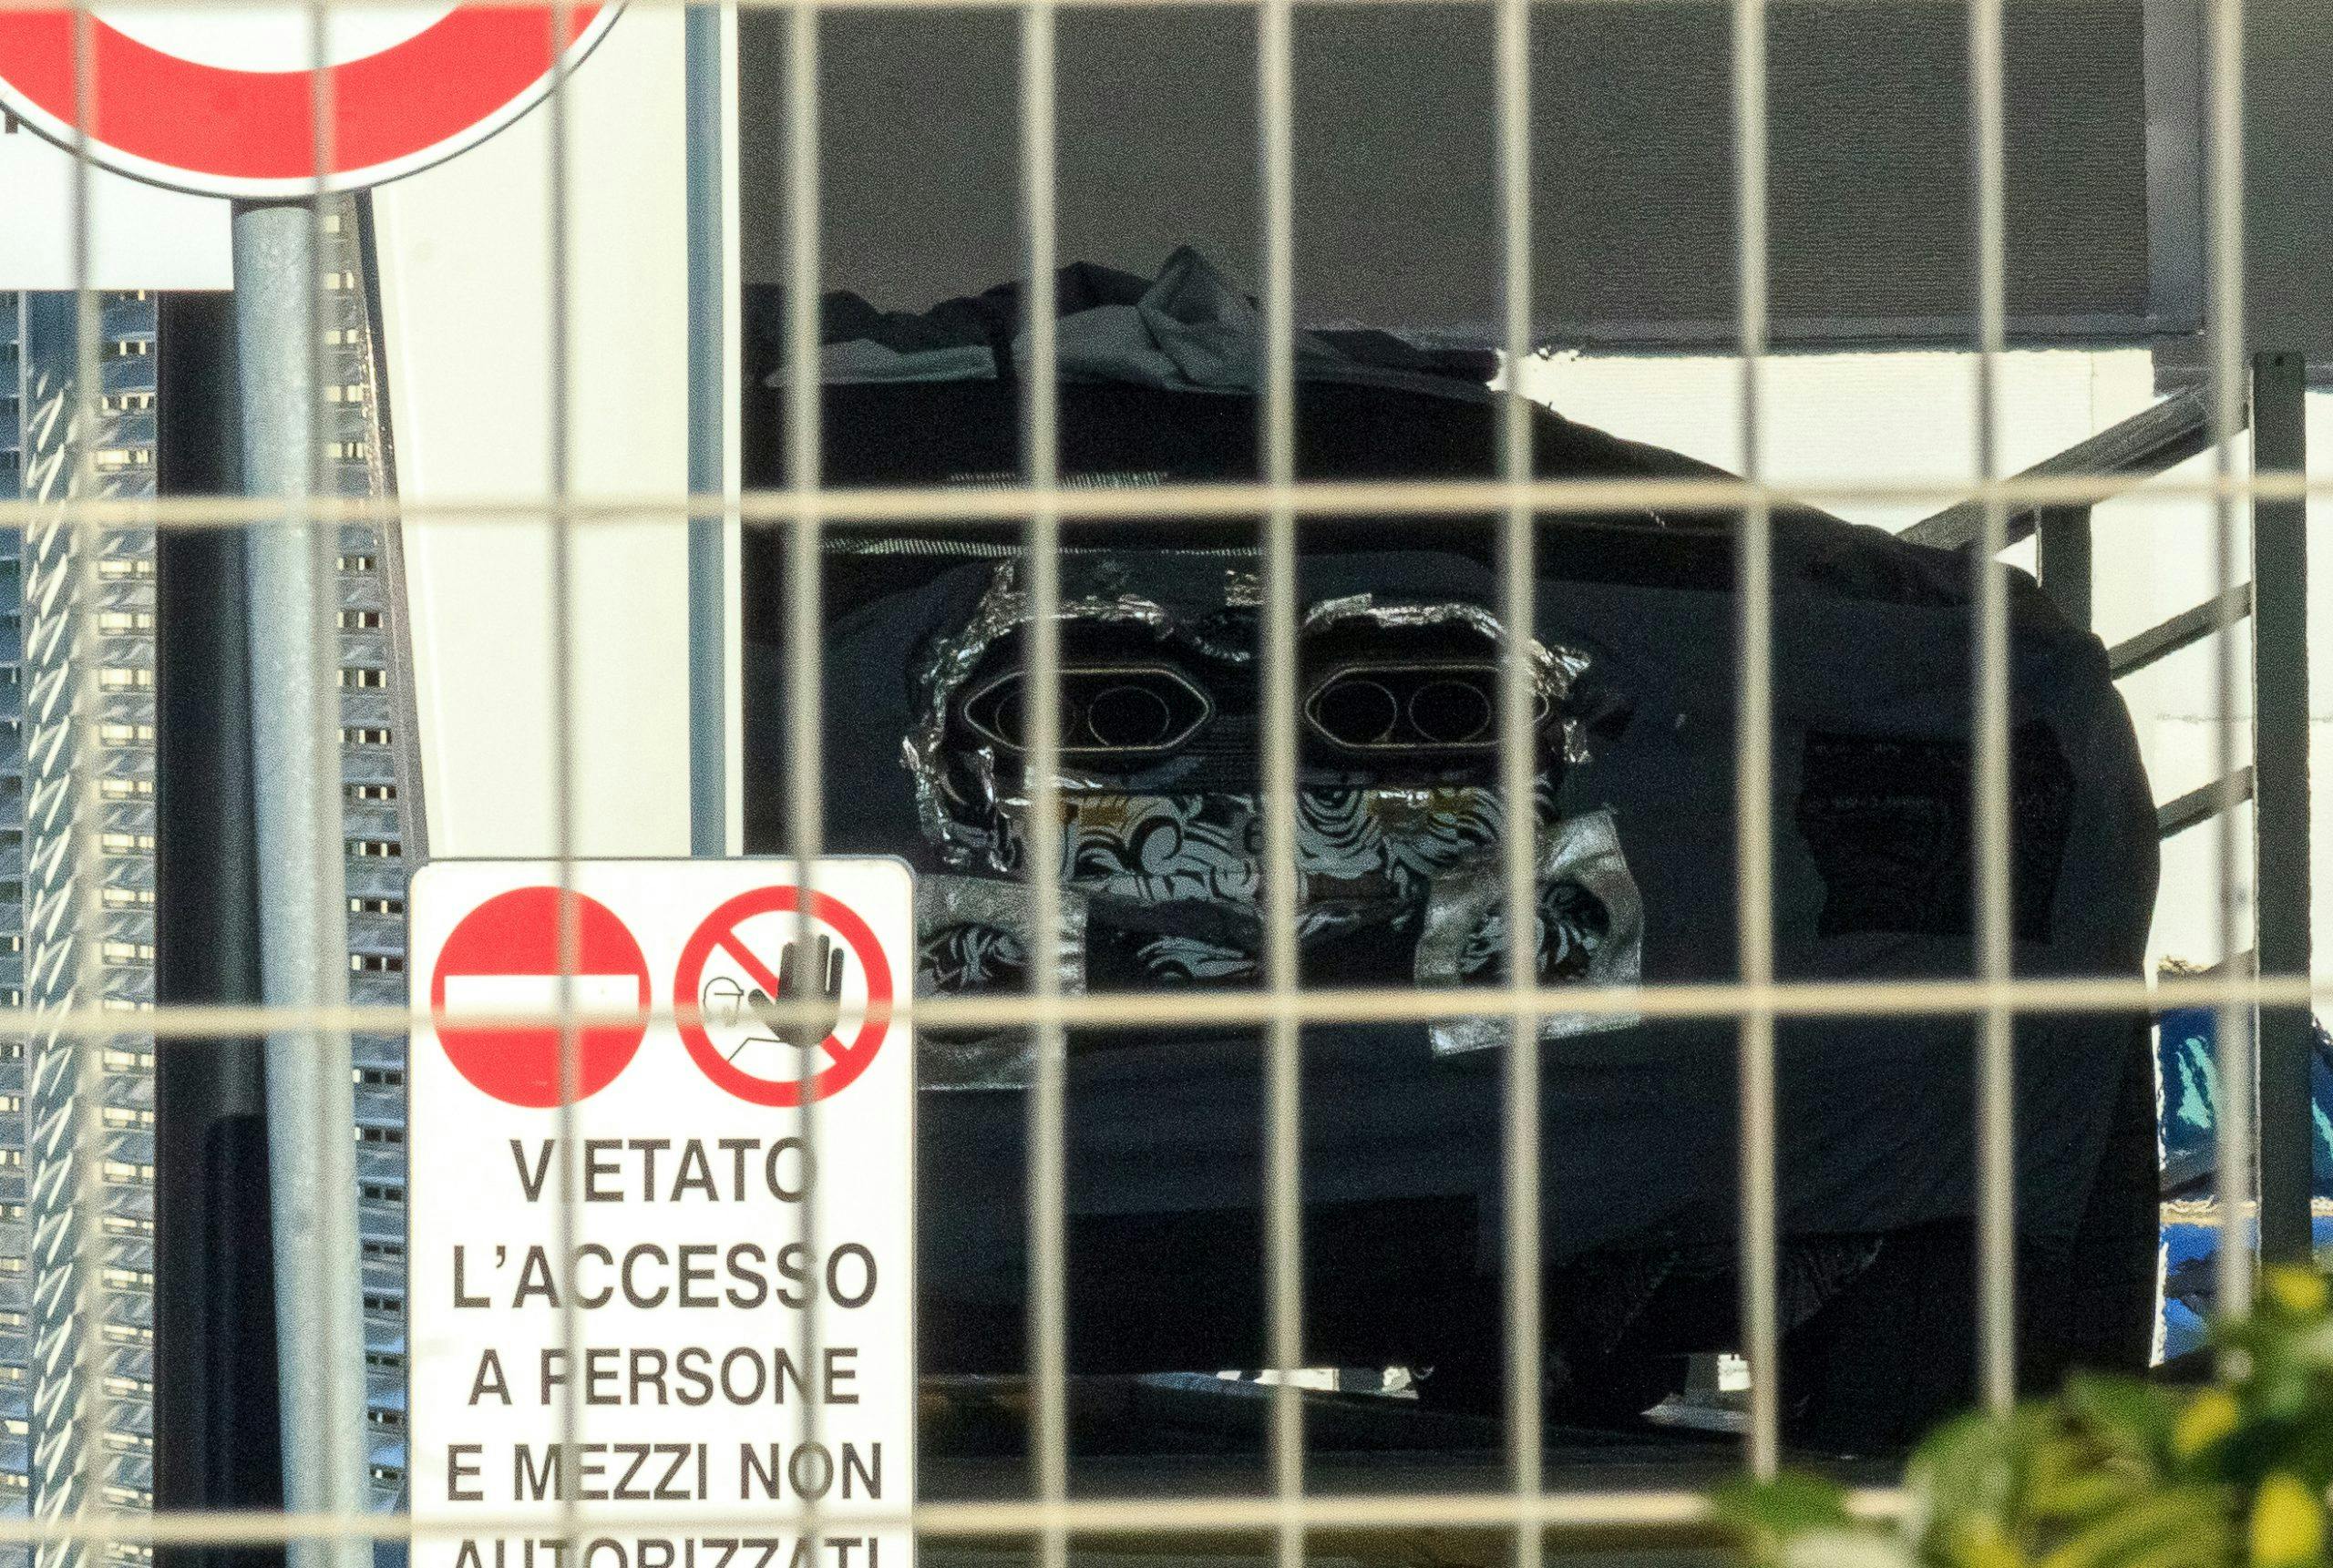 Lamborghini Aventador successor in the cage central high-mounted exhaust outlets